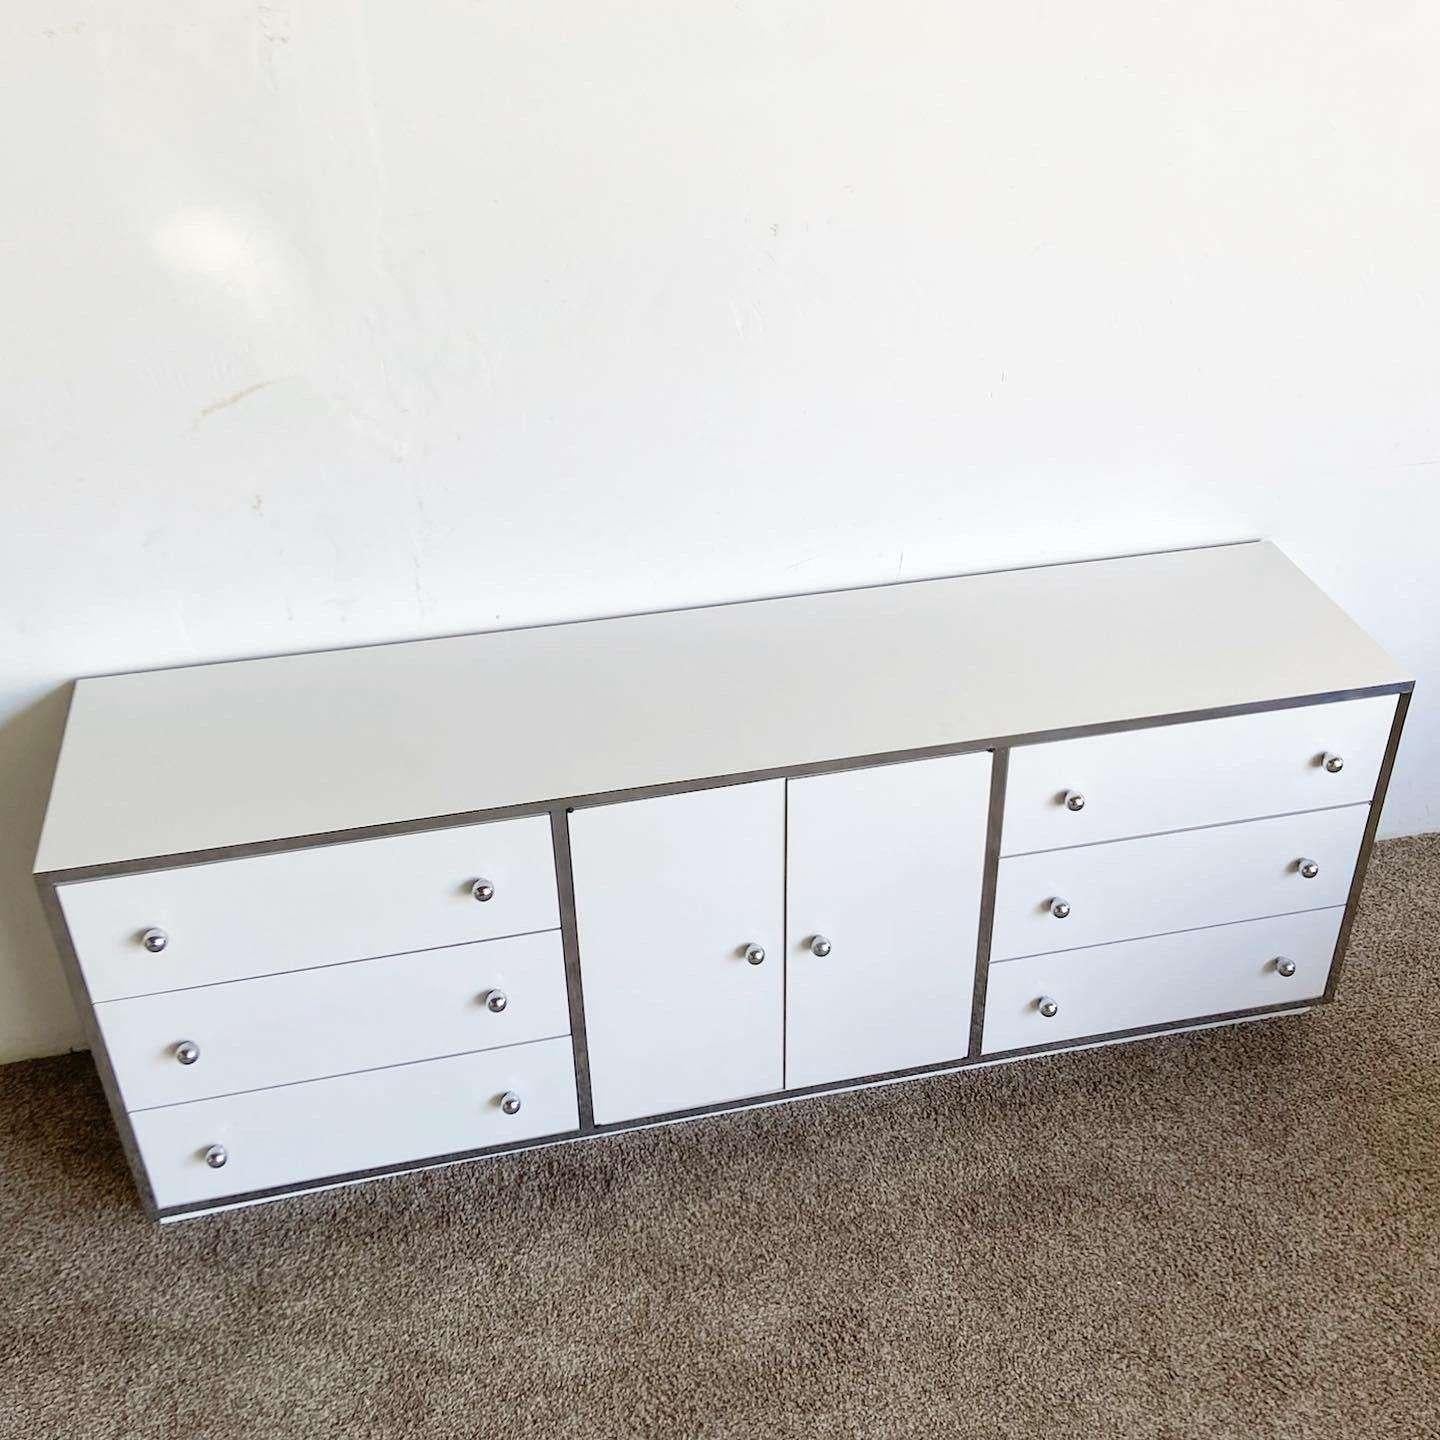 Amazing vintage postmodern rectangular dresser. Features a white lacquer laminate with chrome trim and knobs.
